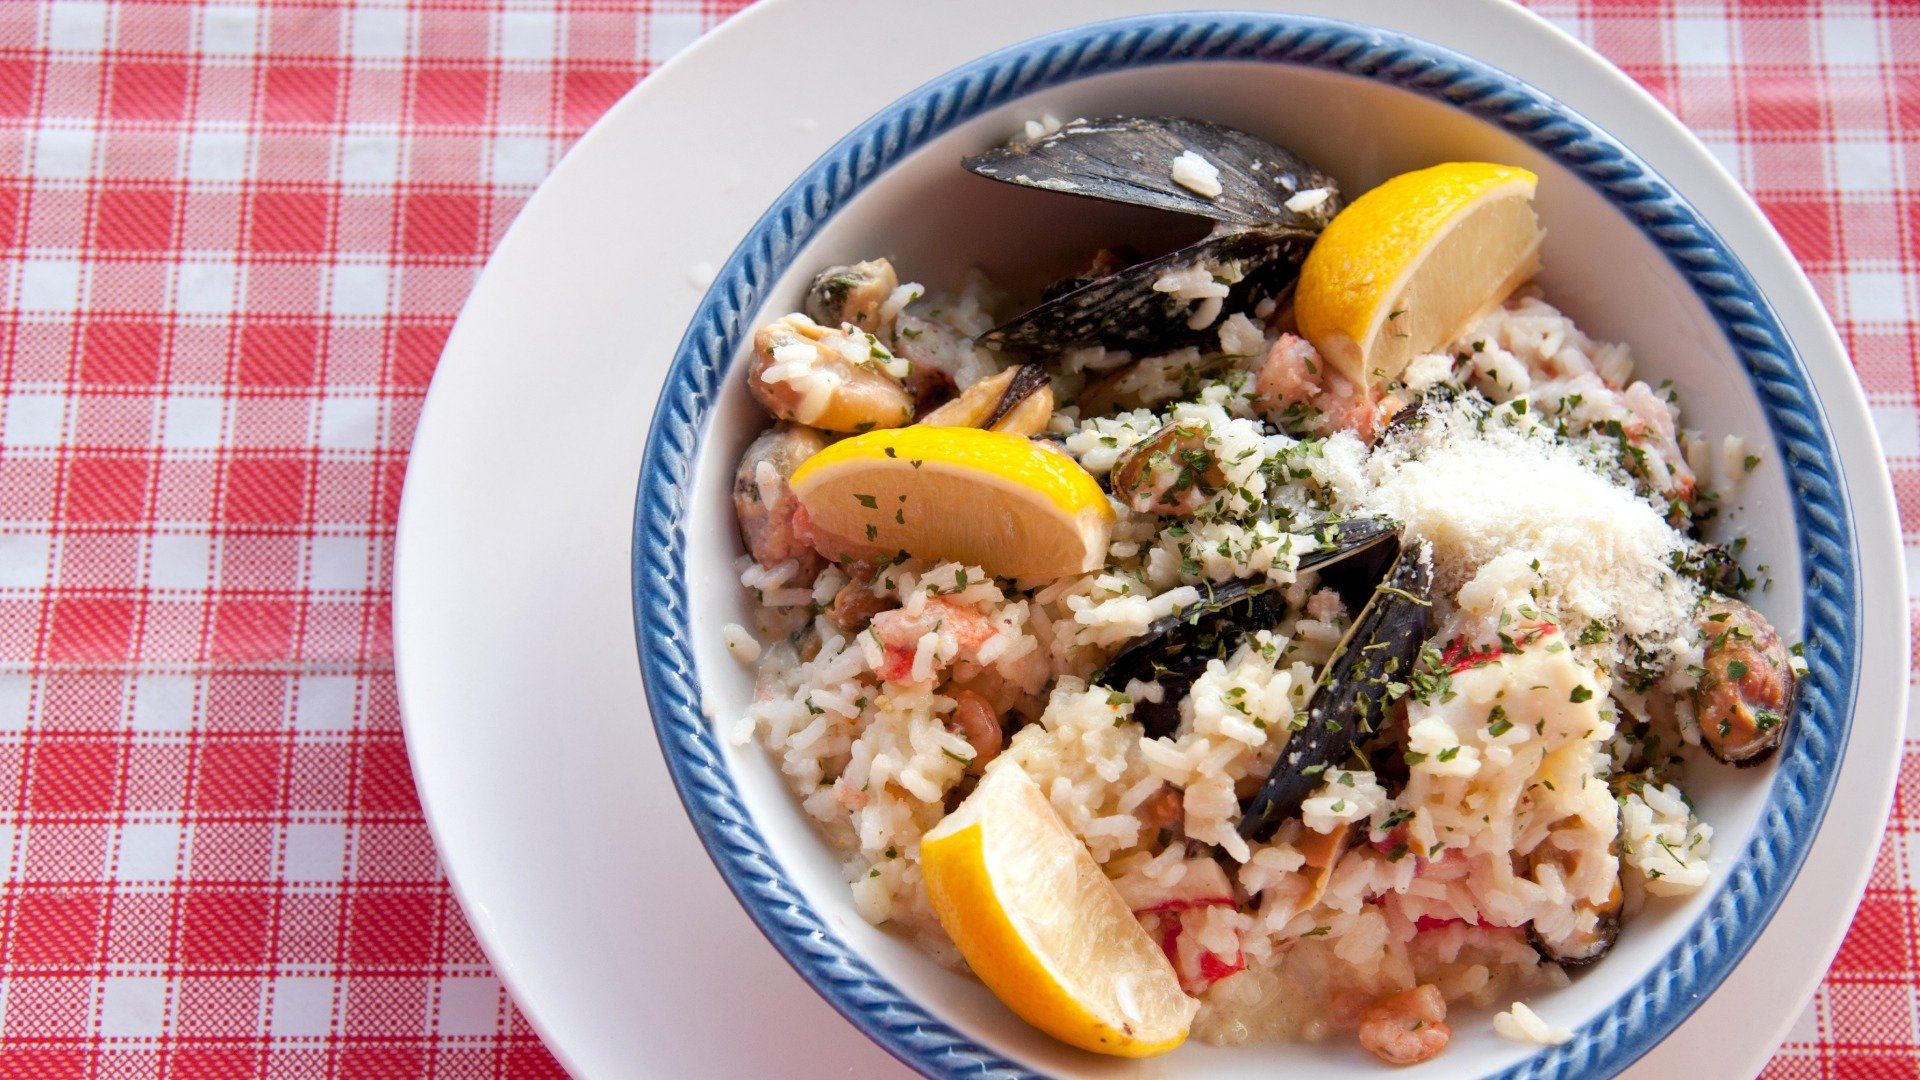 This image is a close-up of a dish of Croatian risotto with seafood. 